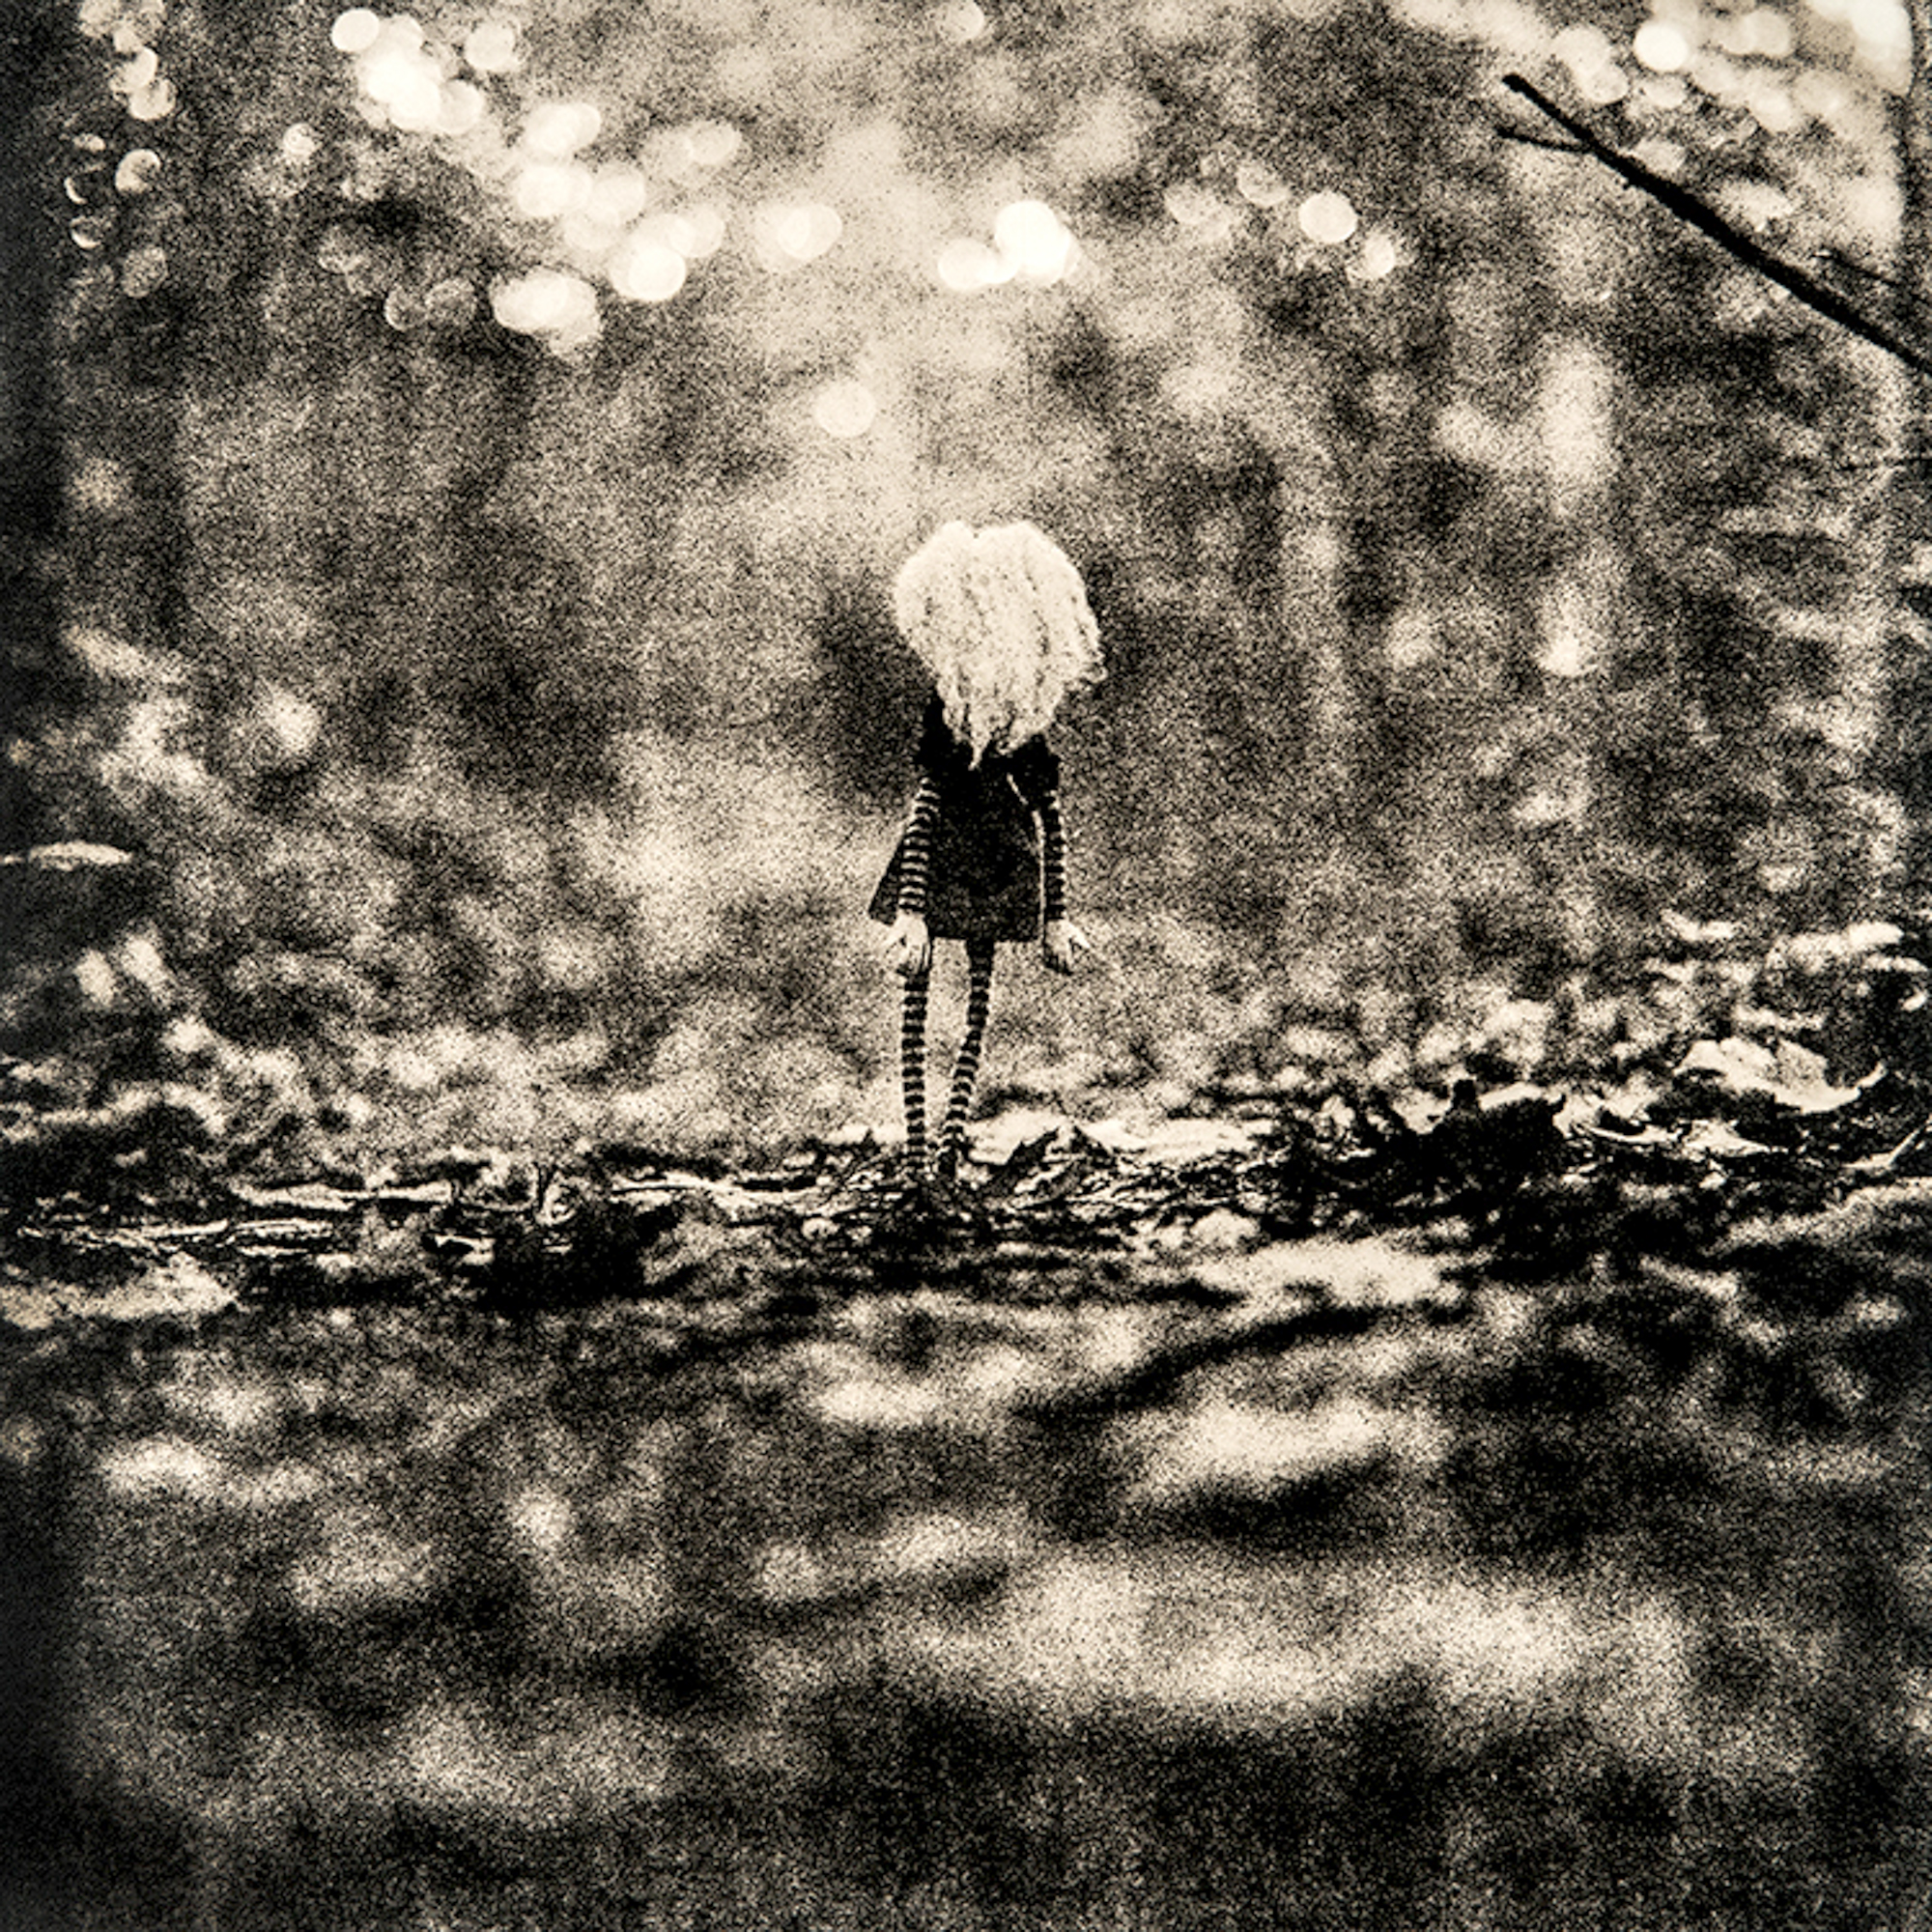   ©KatarzynaDerda    &nbsp;series "If Only" ,    photograph #9, lith print    Chicago 2009 , unique, edition of 1  